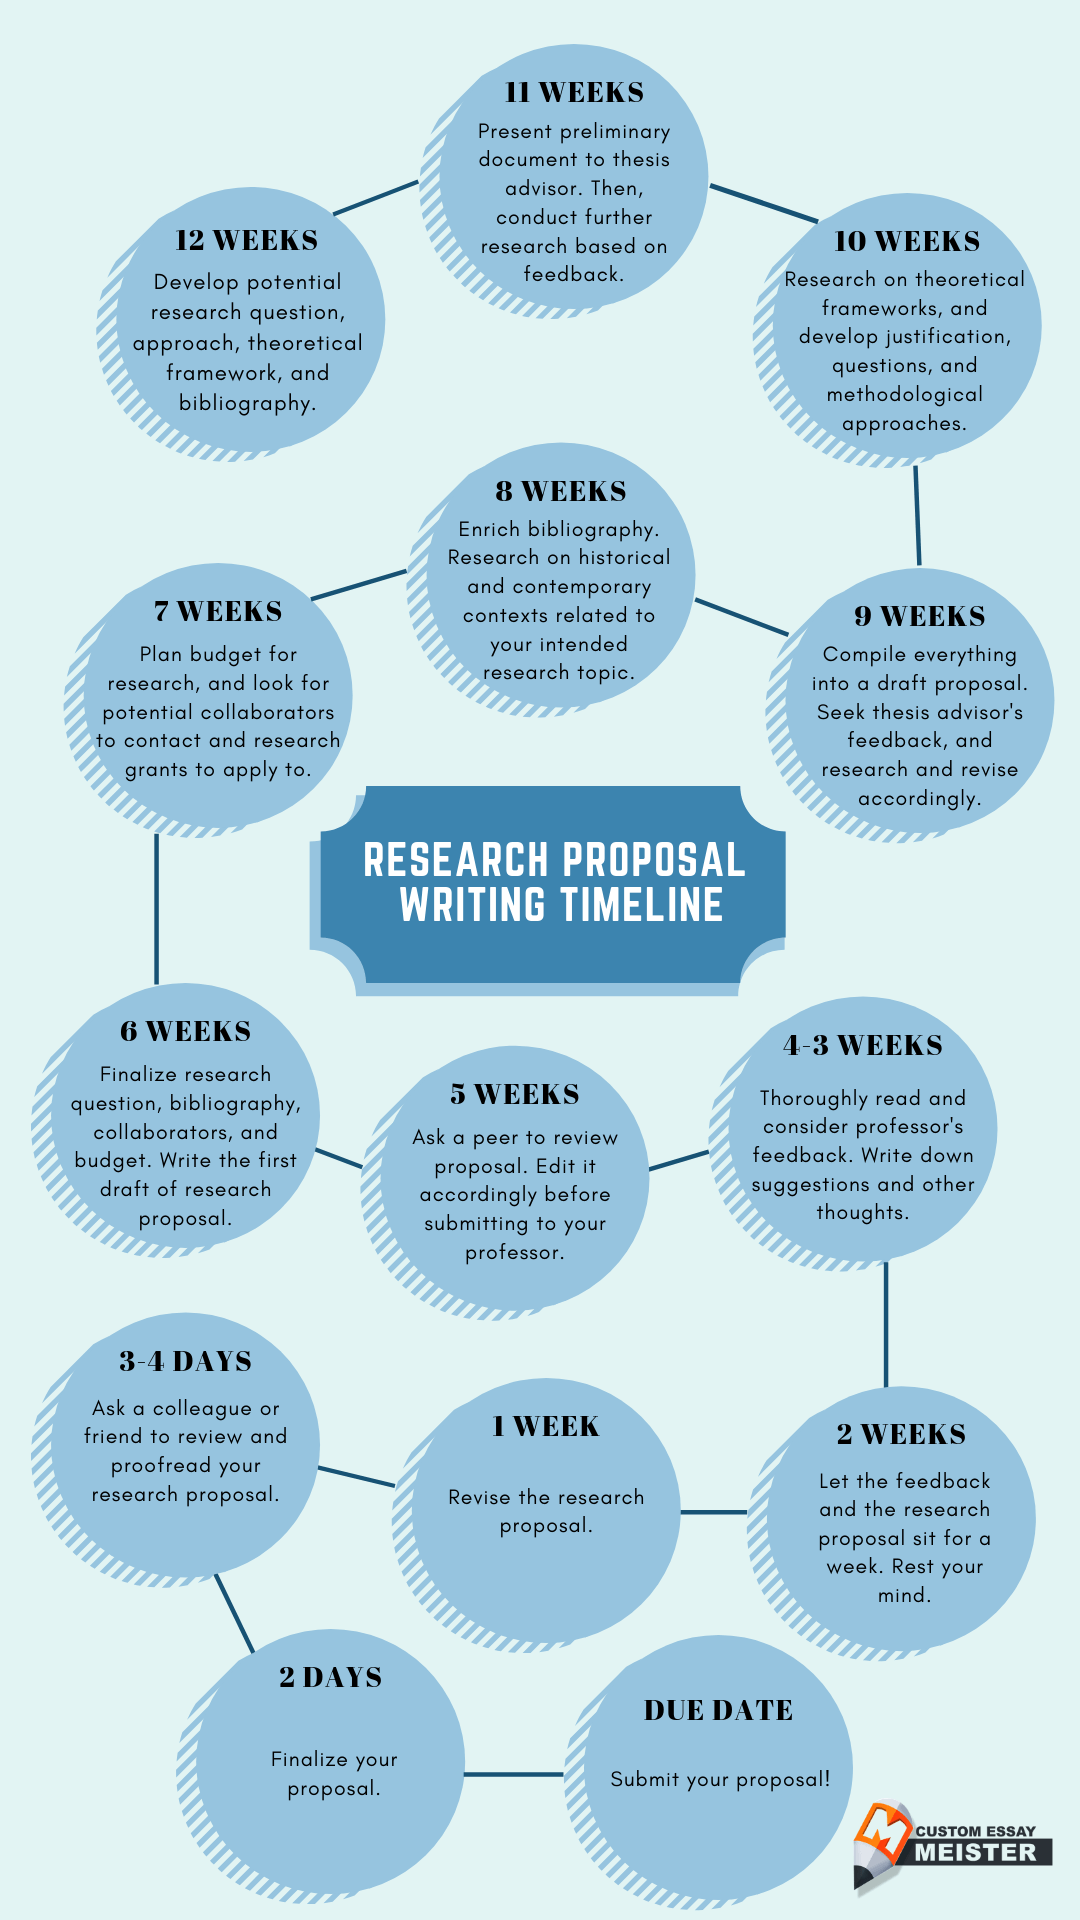 Tips on How to Write a Dissertation Proposal - CustomEssayMeister